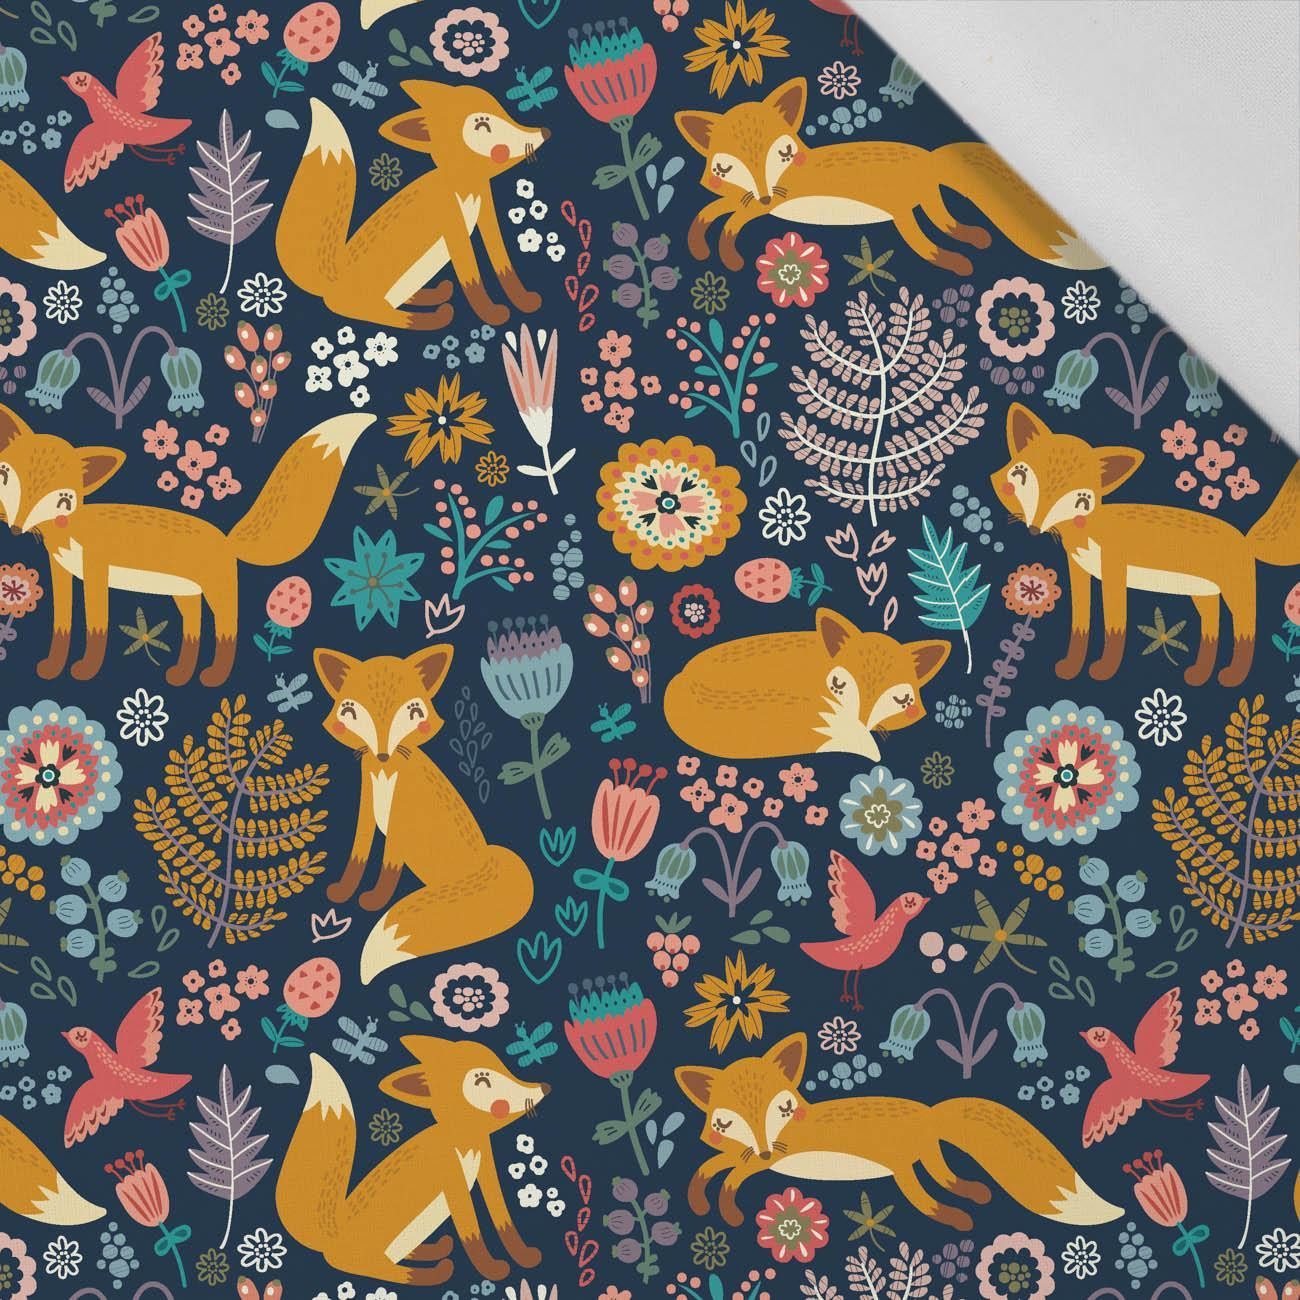 100CM FOXES IN THE FORREST - Cotton woven fabric